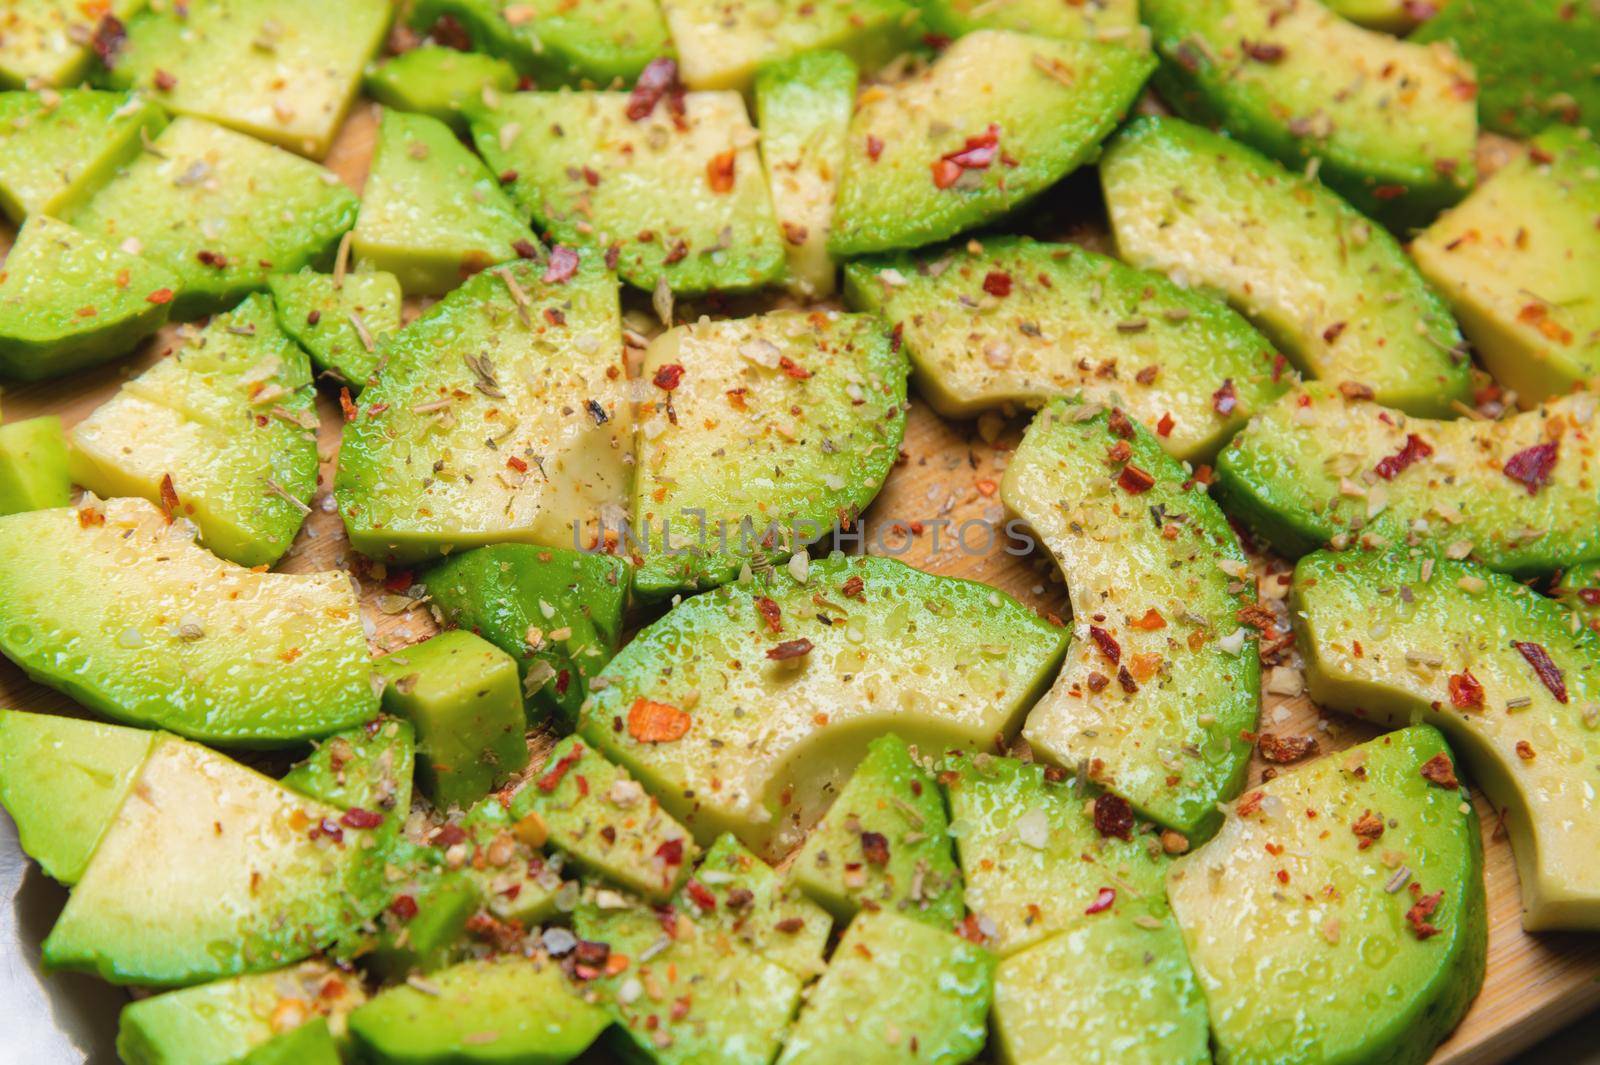 Close-up of sliced avocado pieces on a wooden cutting board. Avocado covered with spices and salt in shallow depth of field. Vegetarian background.